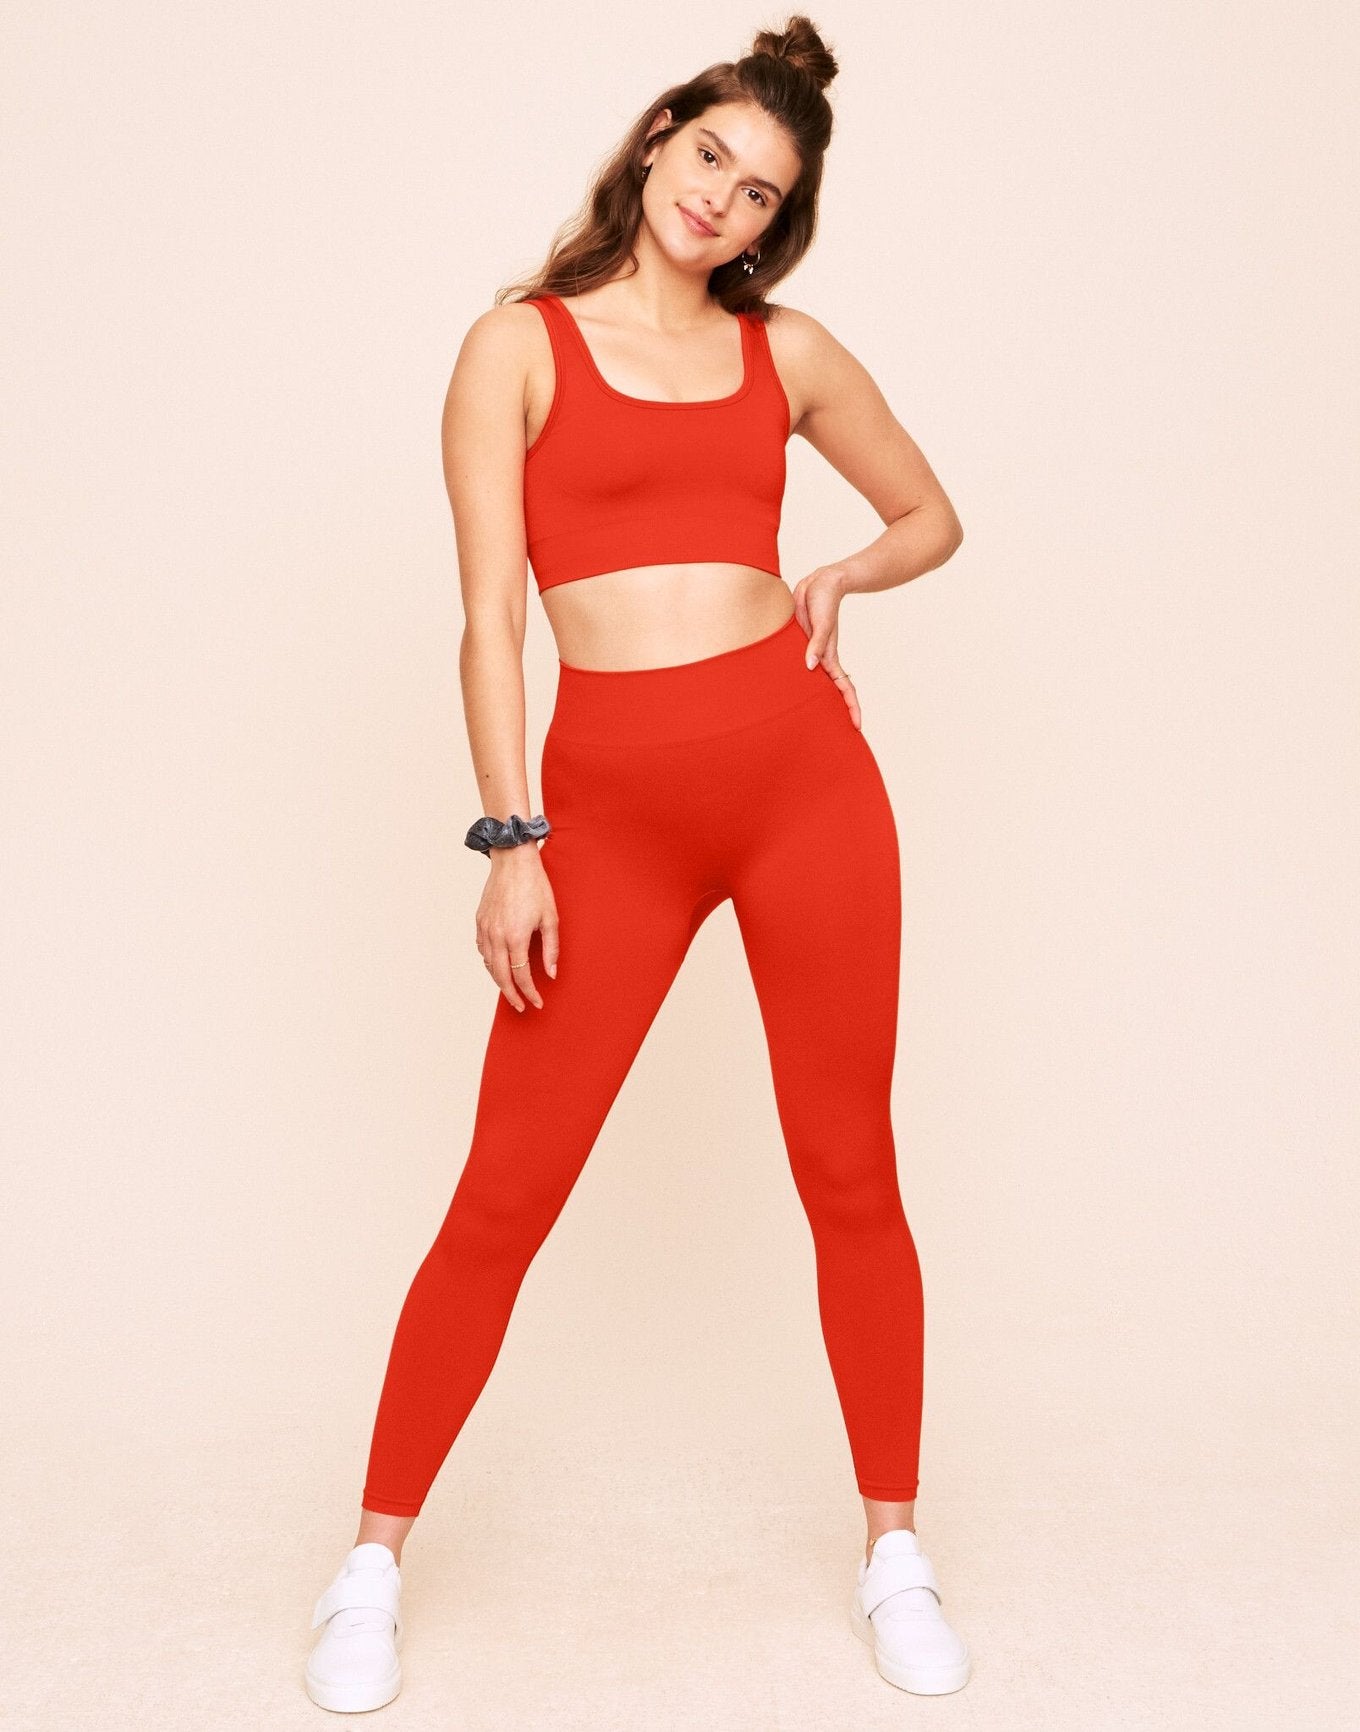 Earth Republic Maeve Ombre Sports Bra Sports Bra in color Solid 05 - Ombre Red and shape sports bra